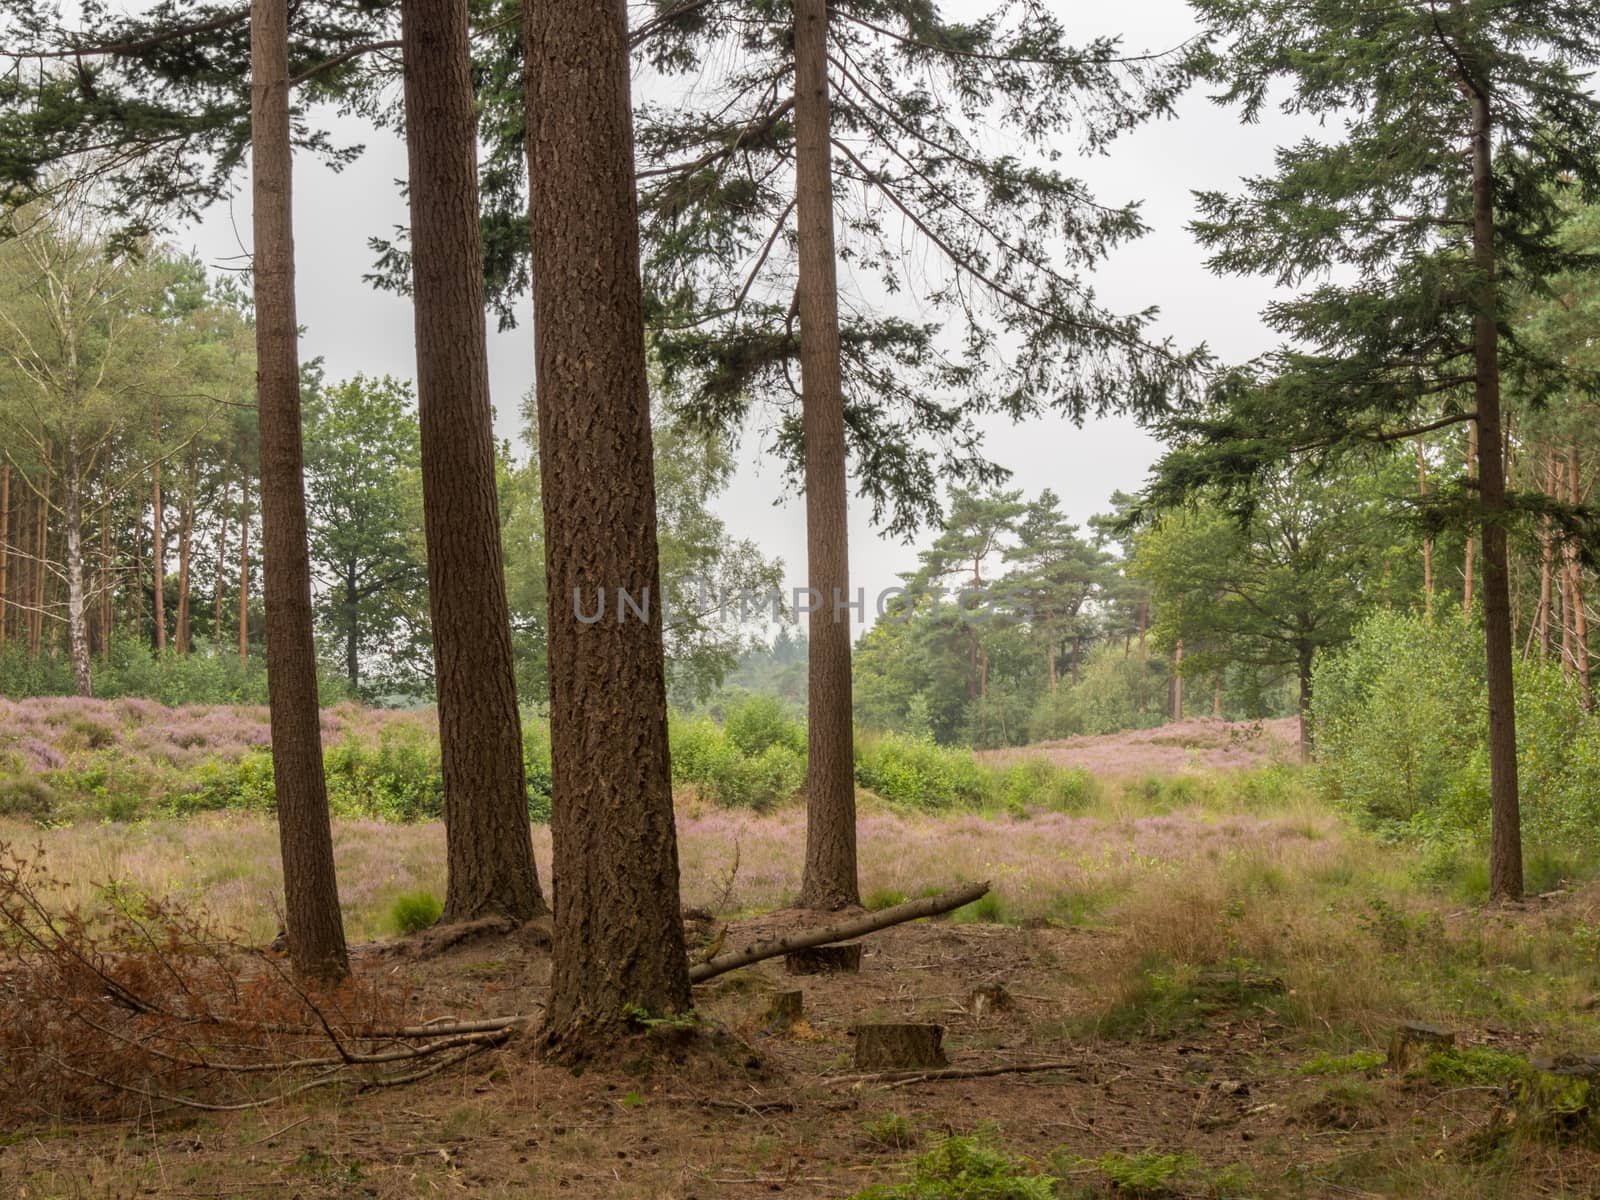 Looking from the forest past some trees at dutch heathland